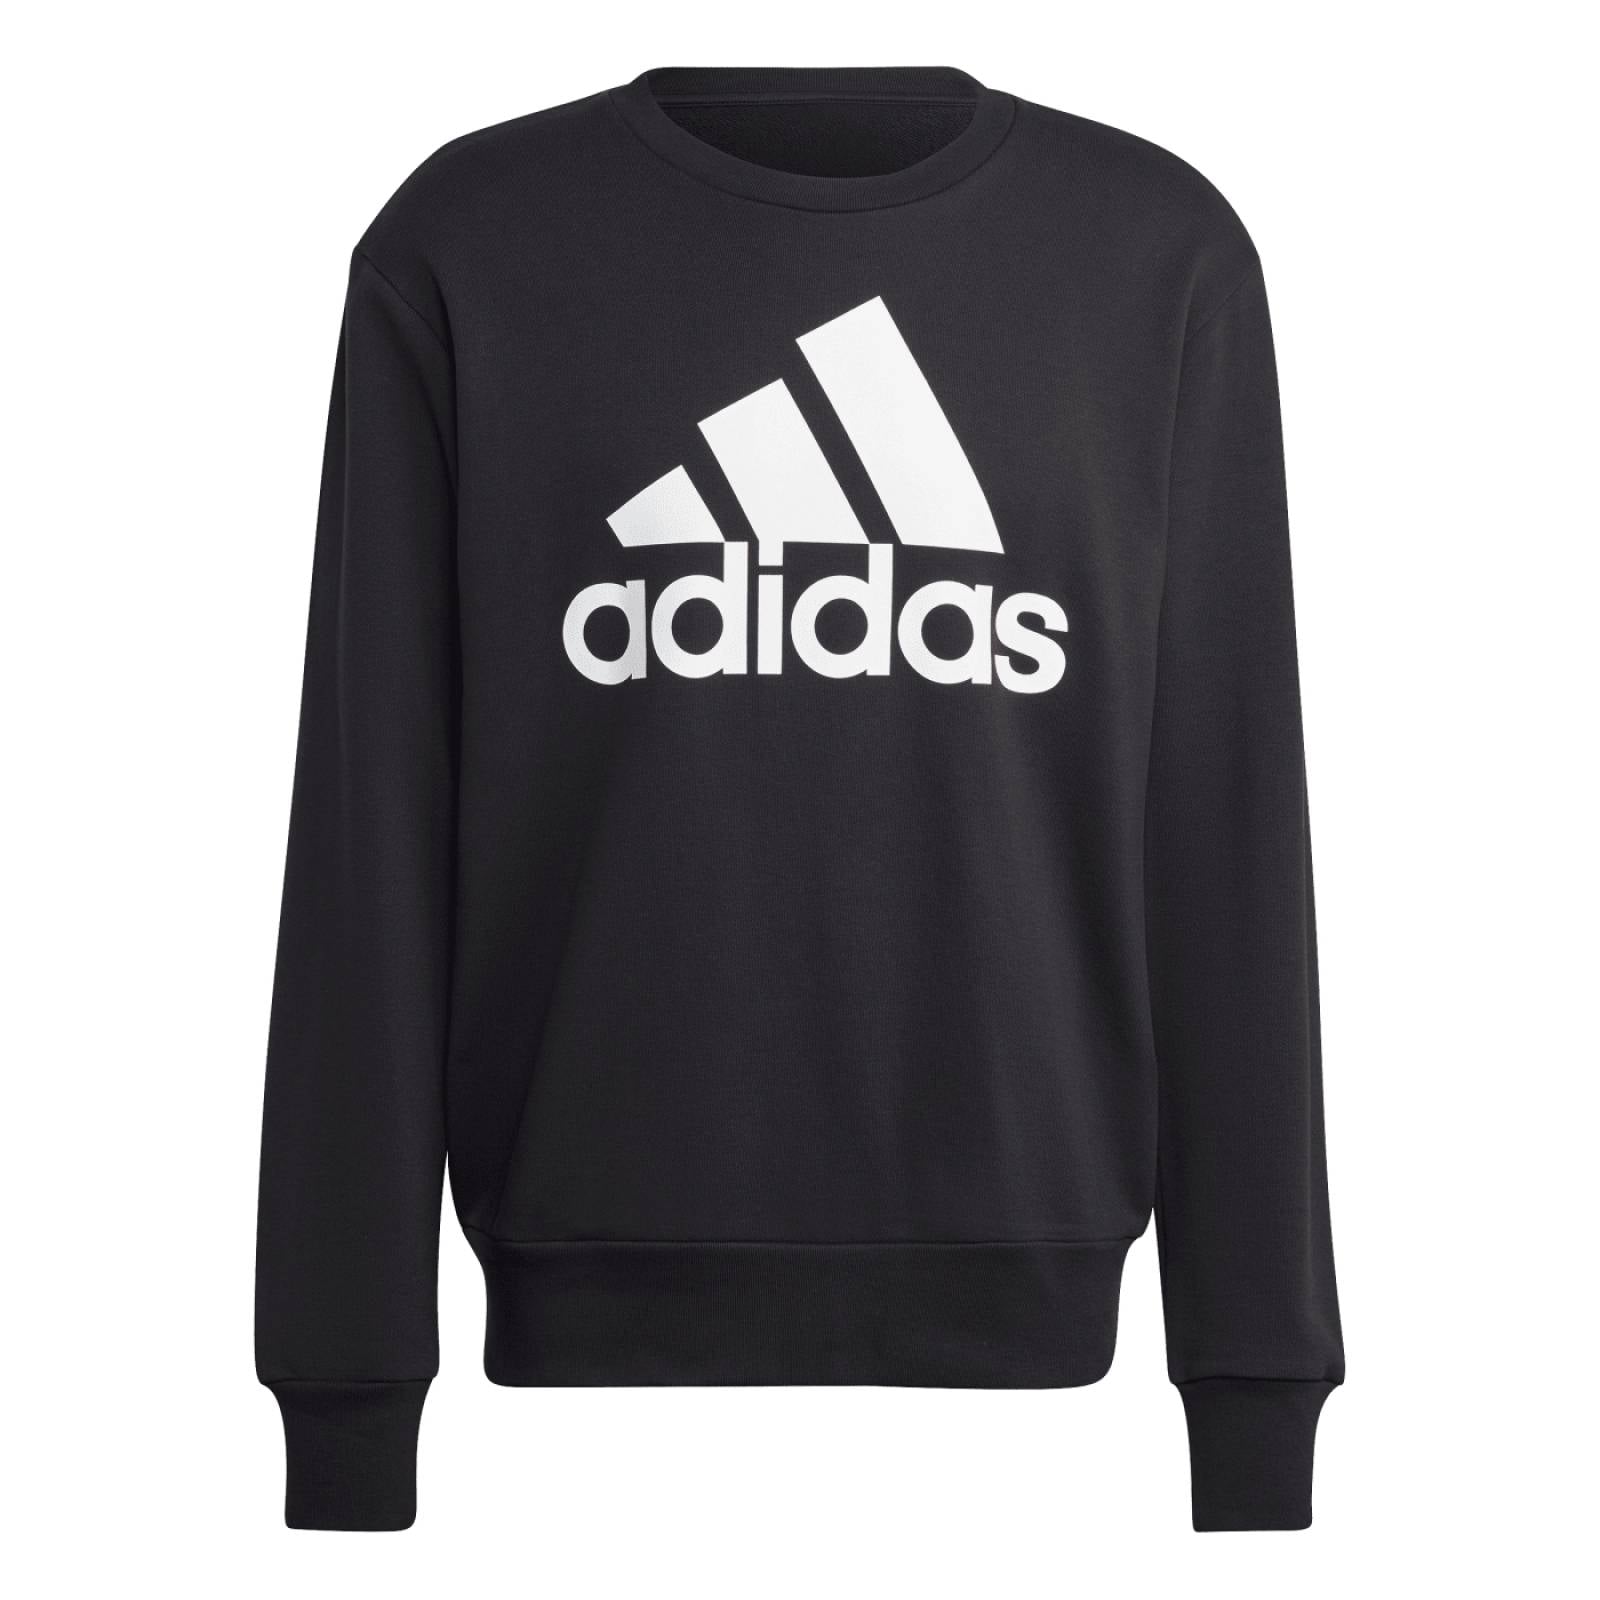 SUETER ADIDAS HOMBRE NEGRO M BL FT SWT IC9324